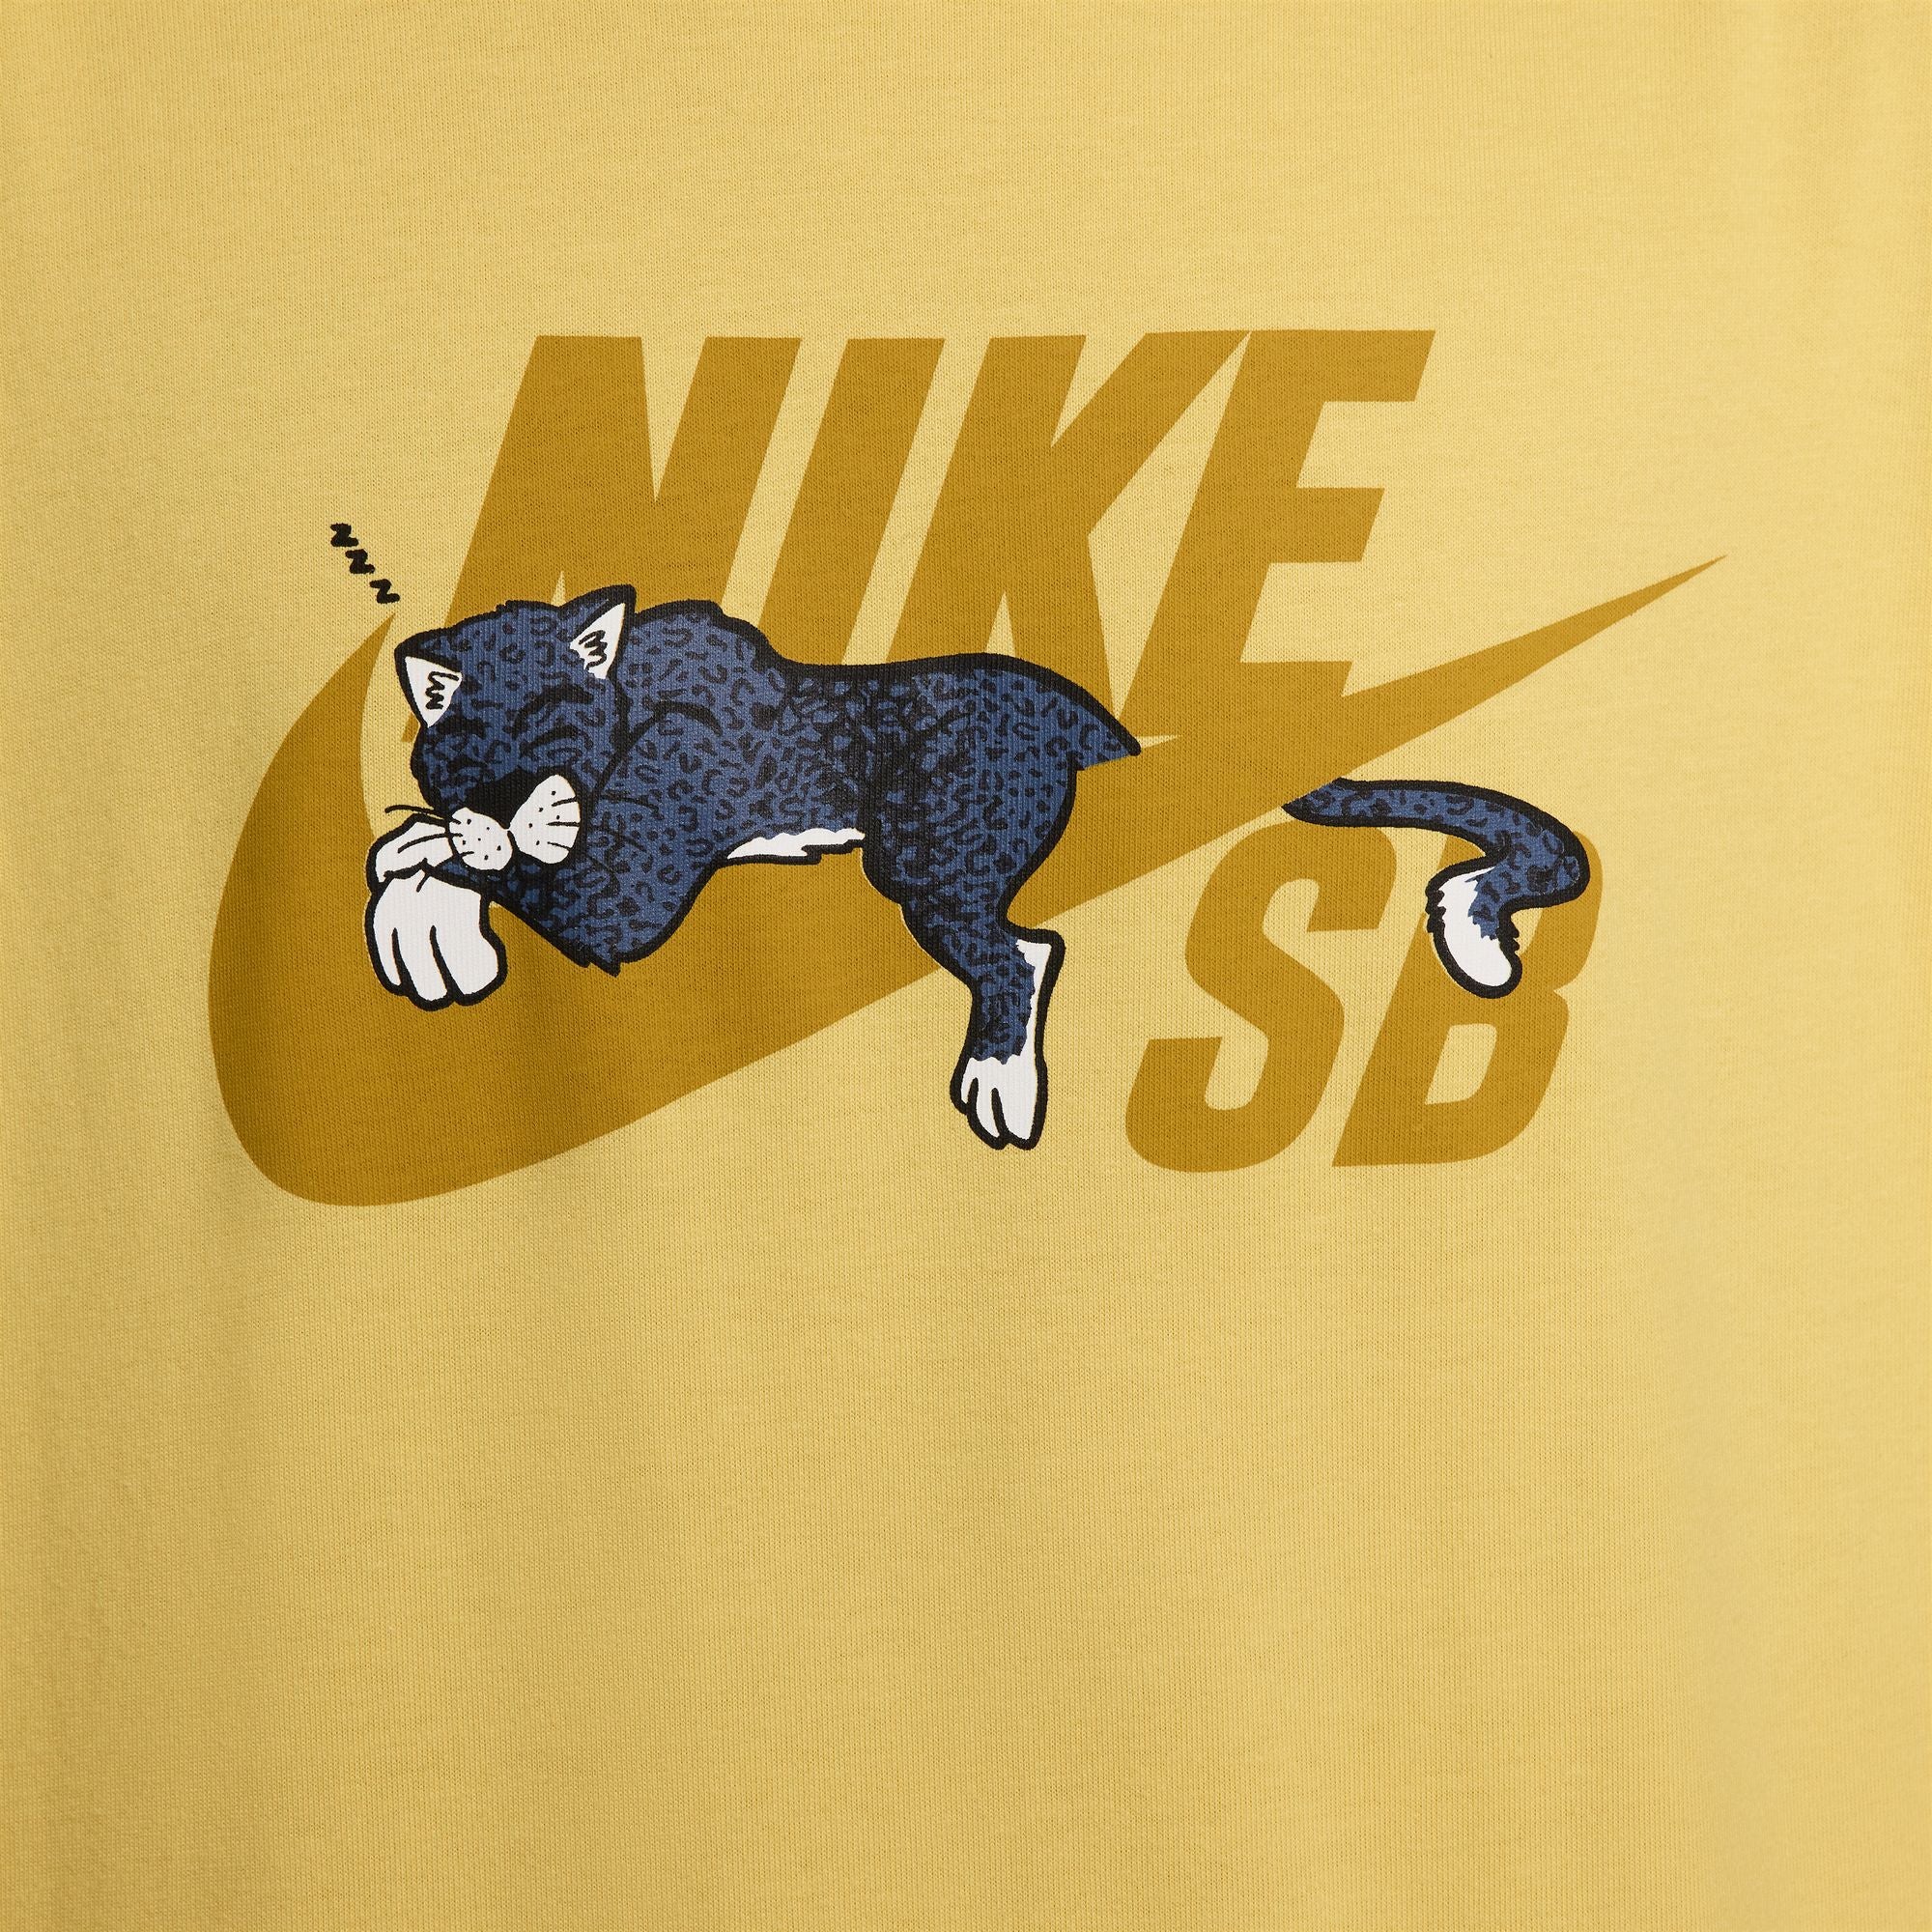 Yellow nike sb short sleeved T-shirt with nike sb swoosh logo and panther graphic on front. Free uk shipping over £50